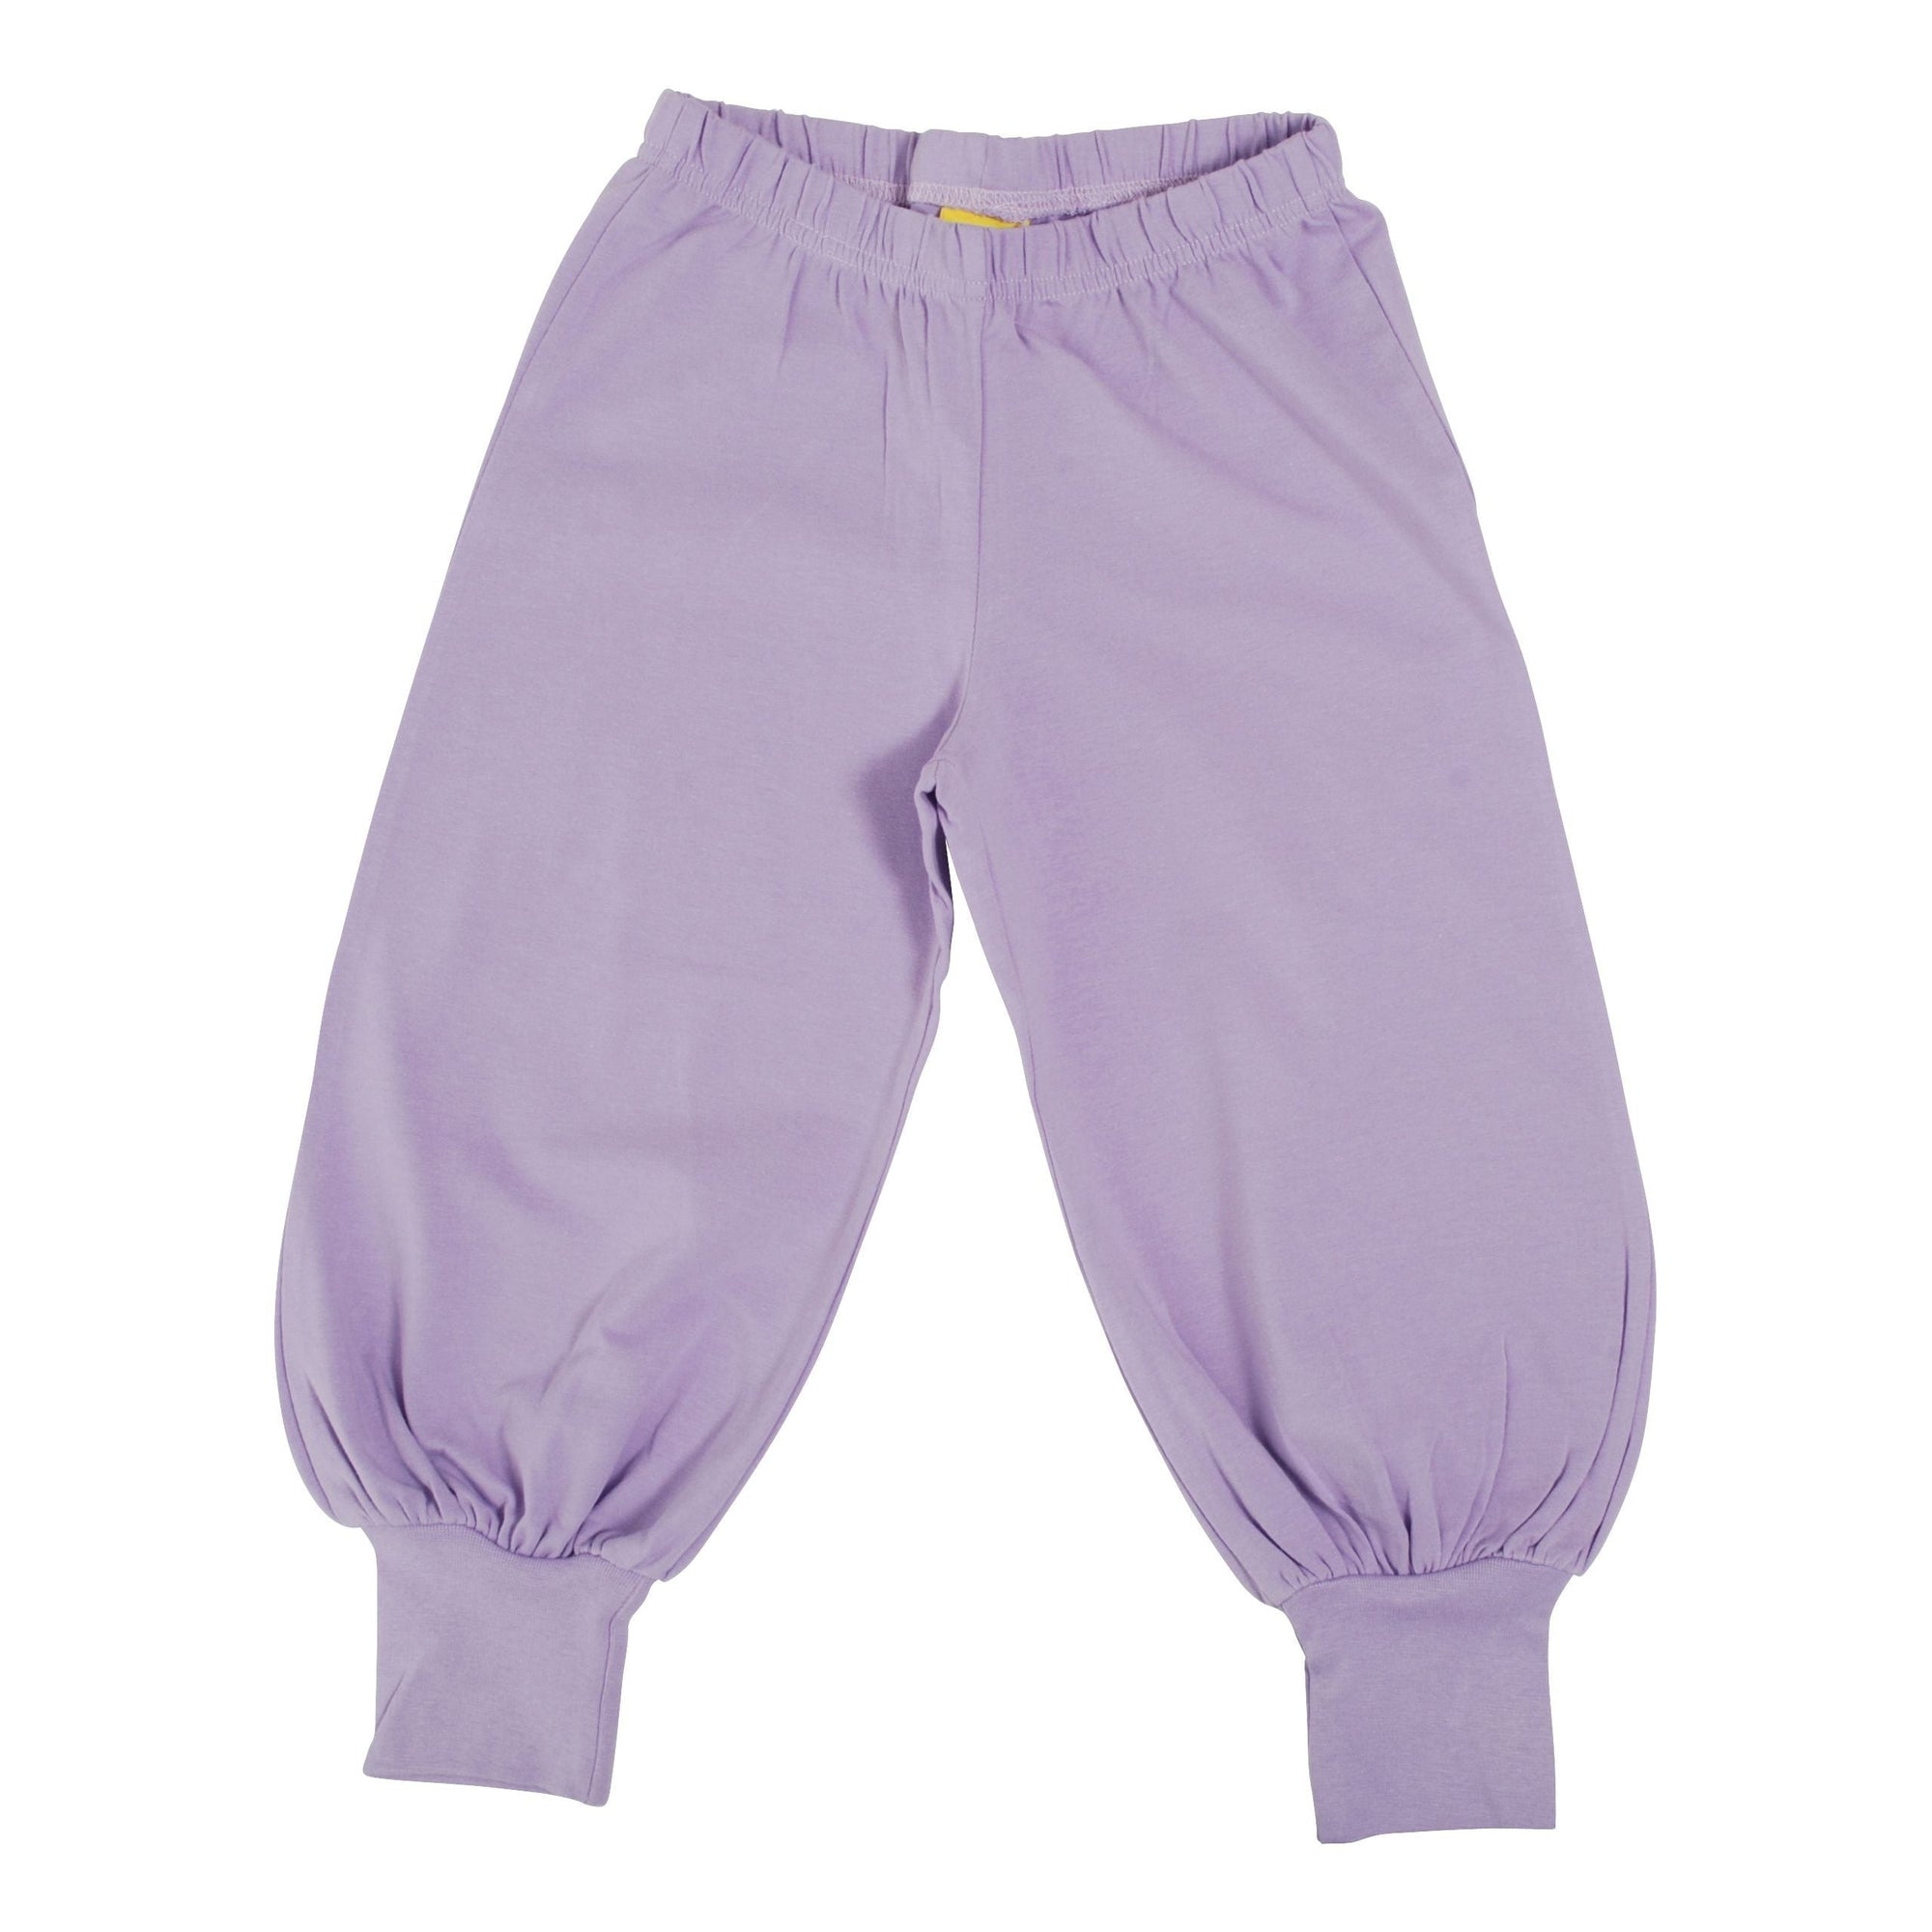 Viola Baggy Pants - 2 Left Size 8-10 & 12-14 years-More Than A Fling-Modern Rascals